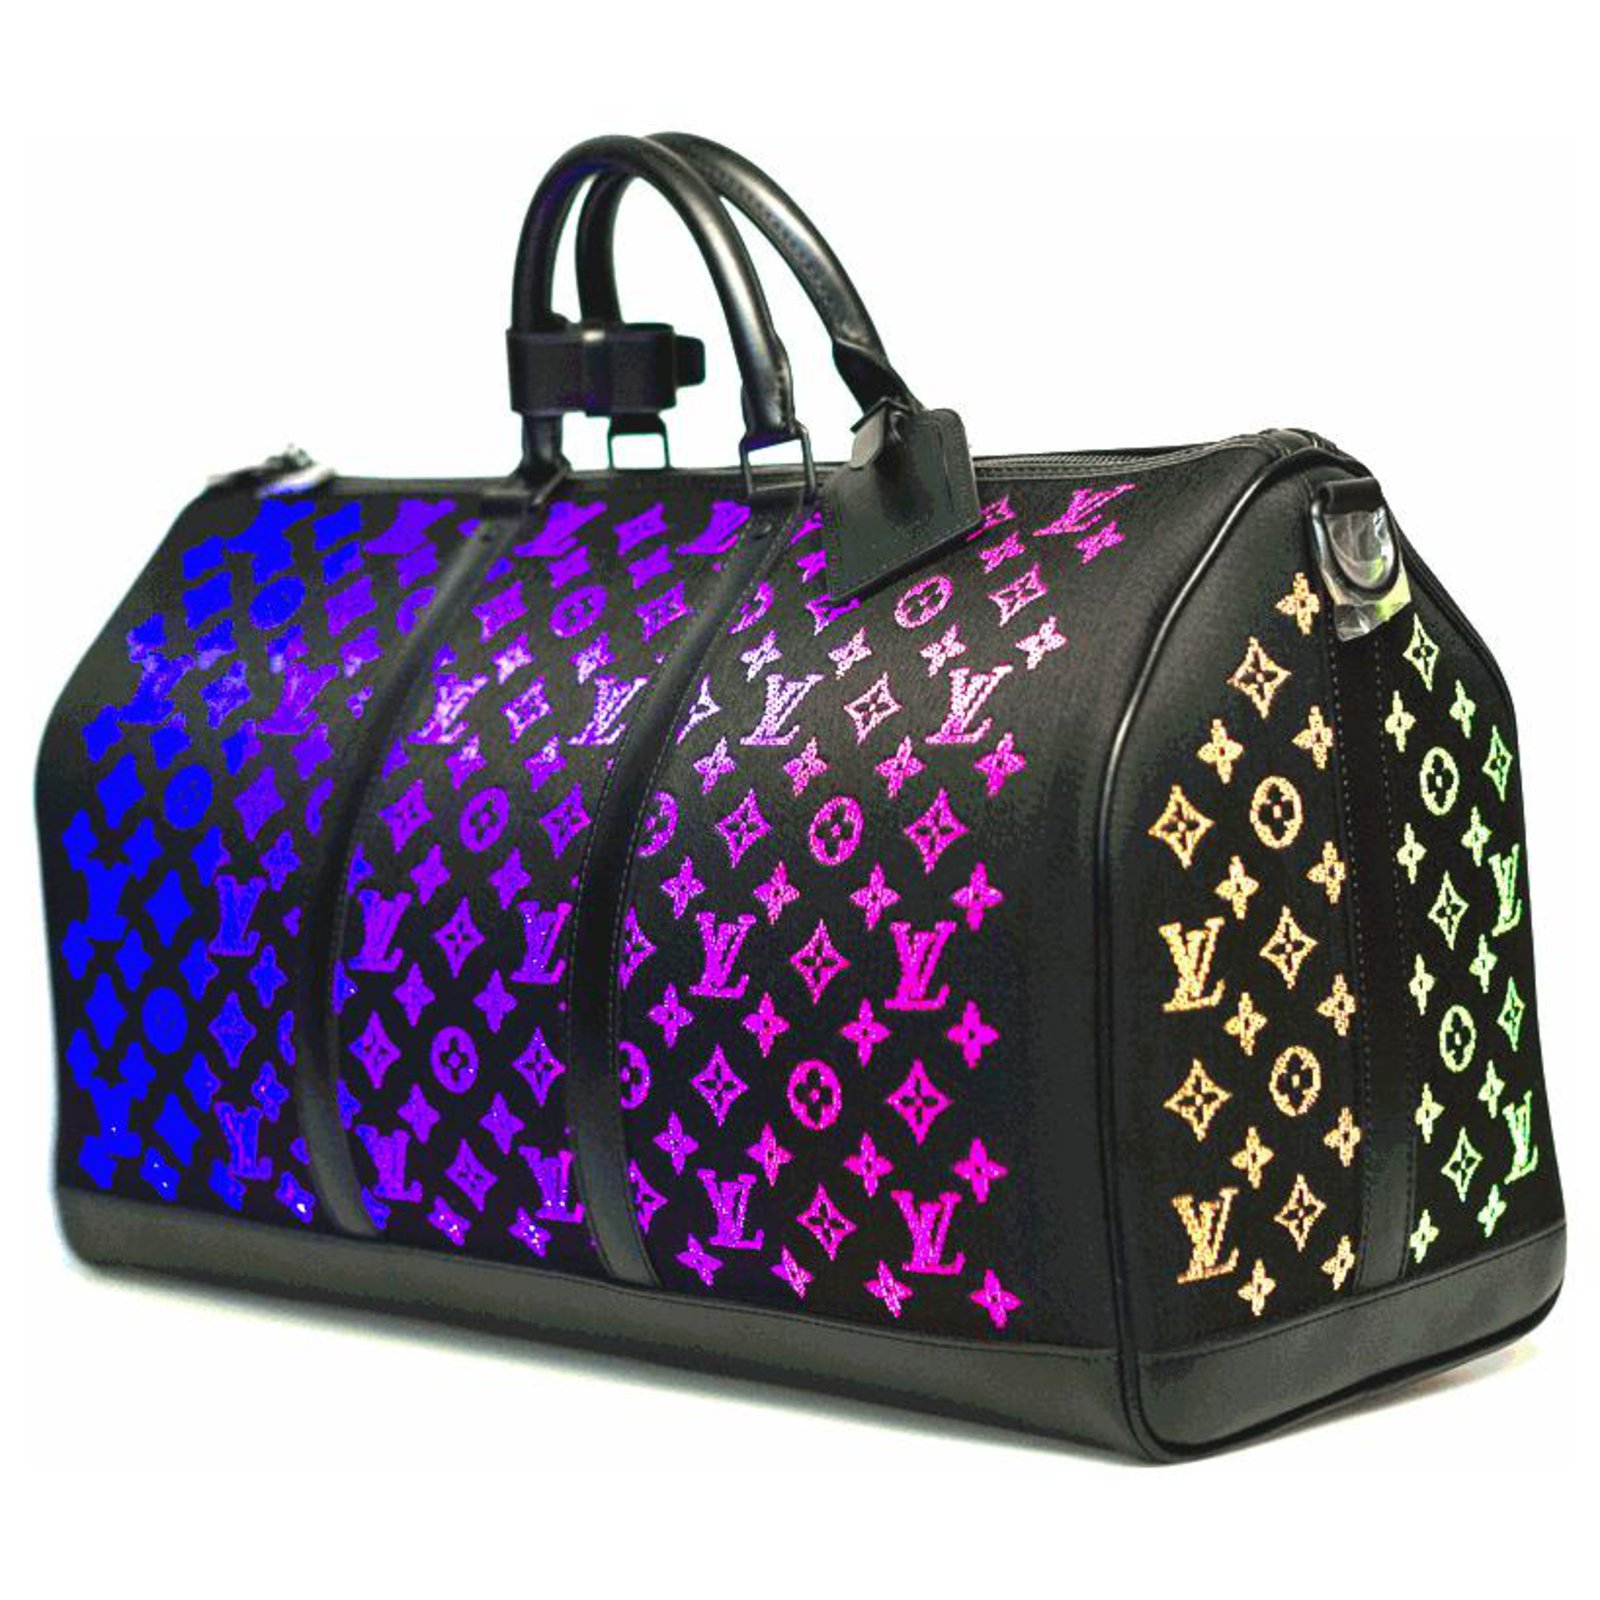 The rare & iconic Louis Vuitton Light Up Keepall💡